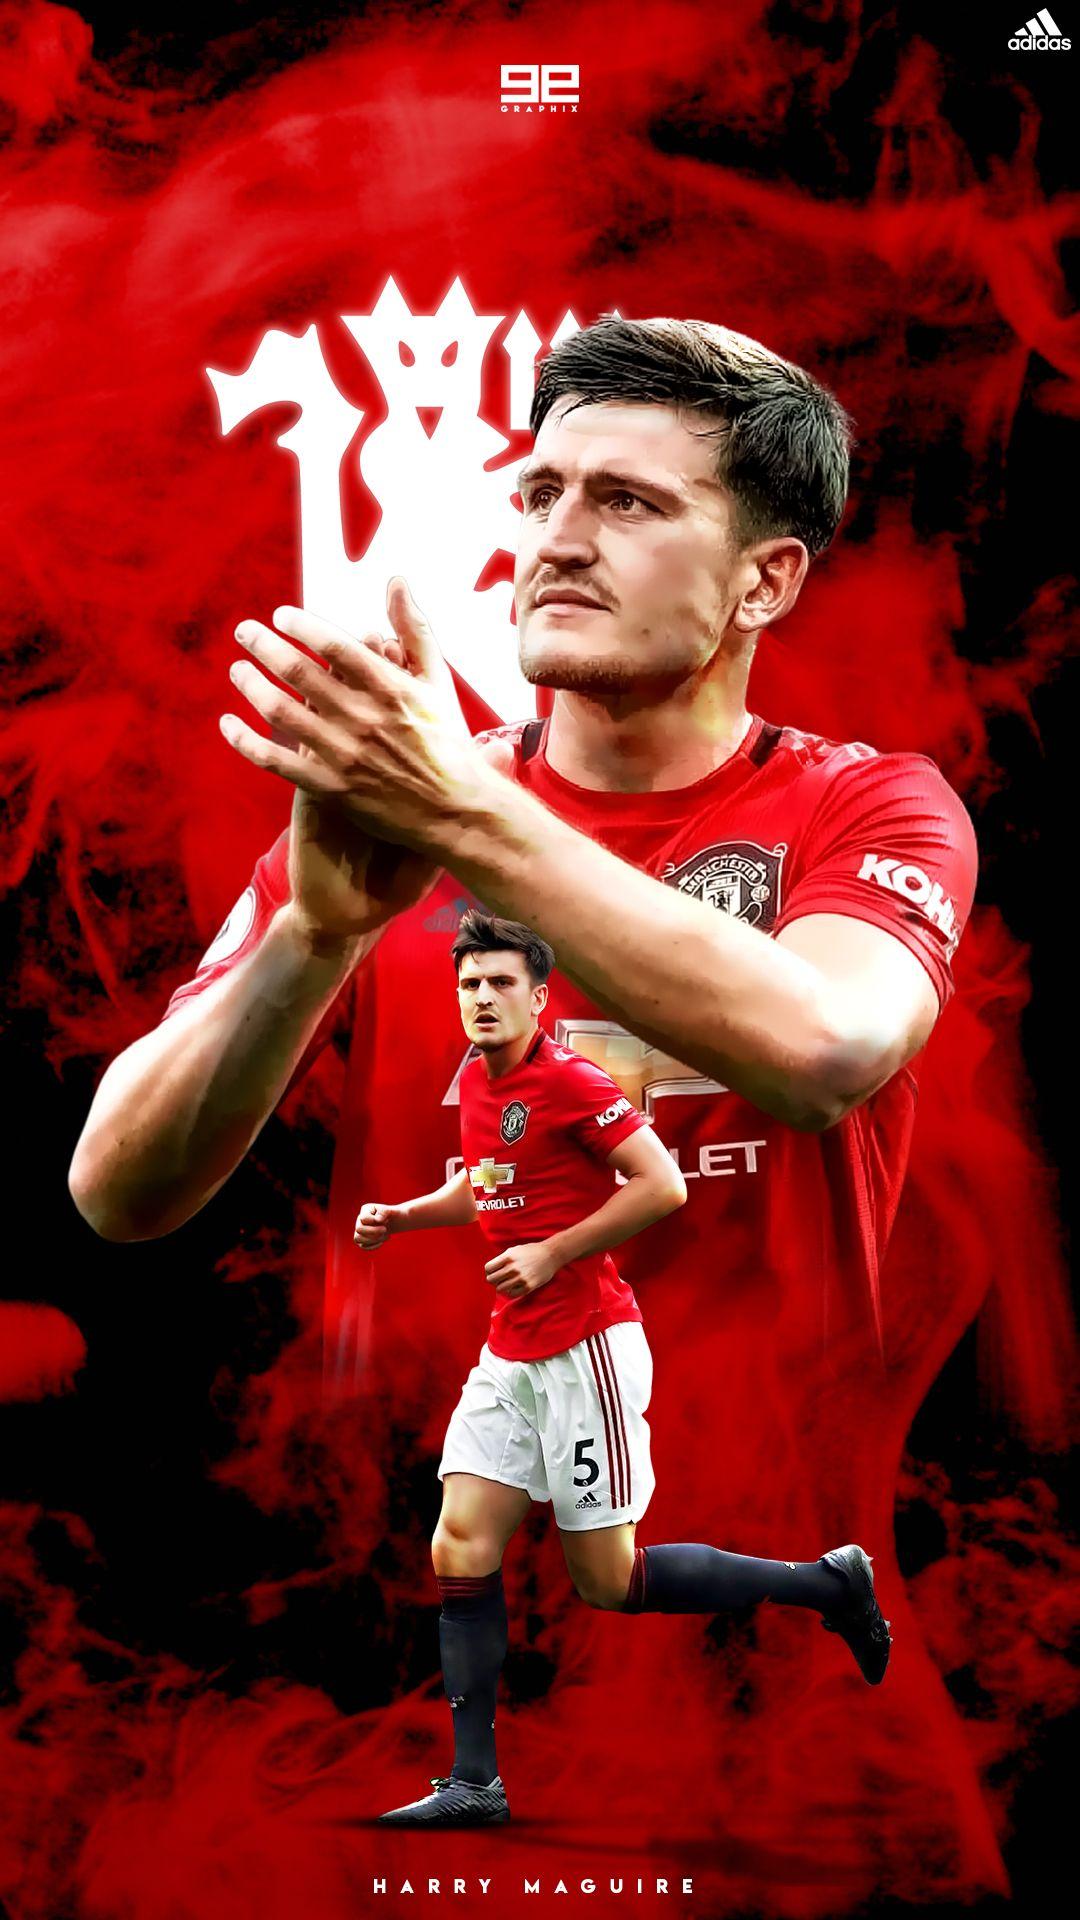 Harry Maguire. Manchester United. Manchester united fans